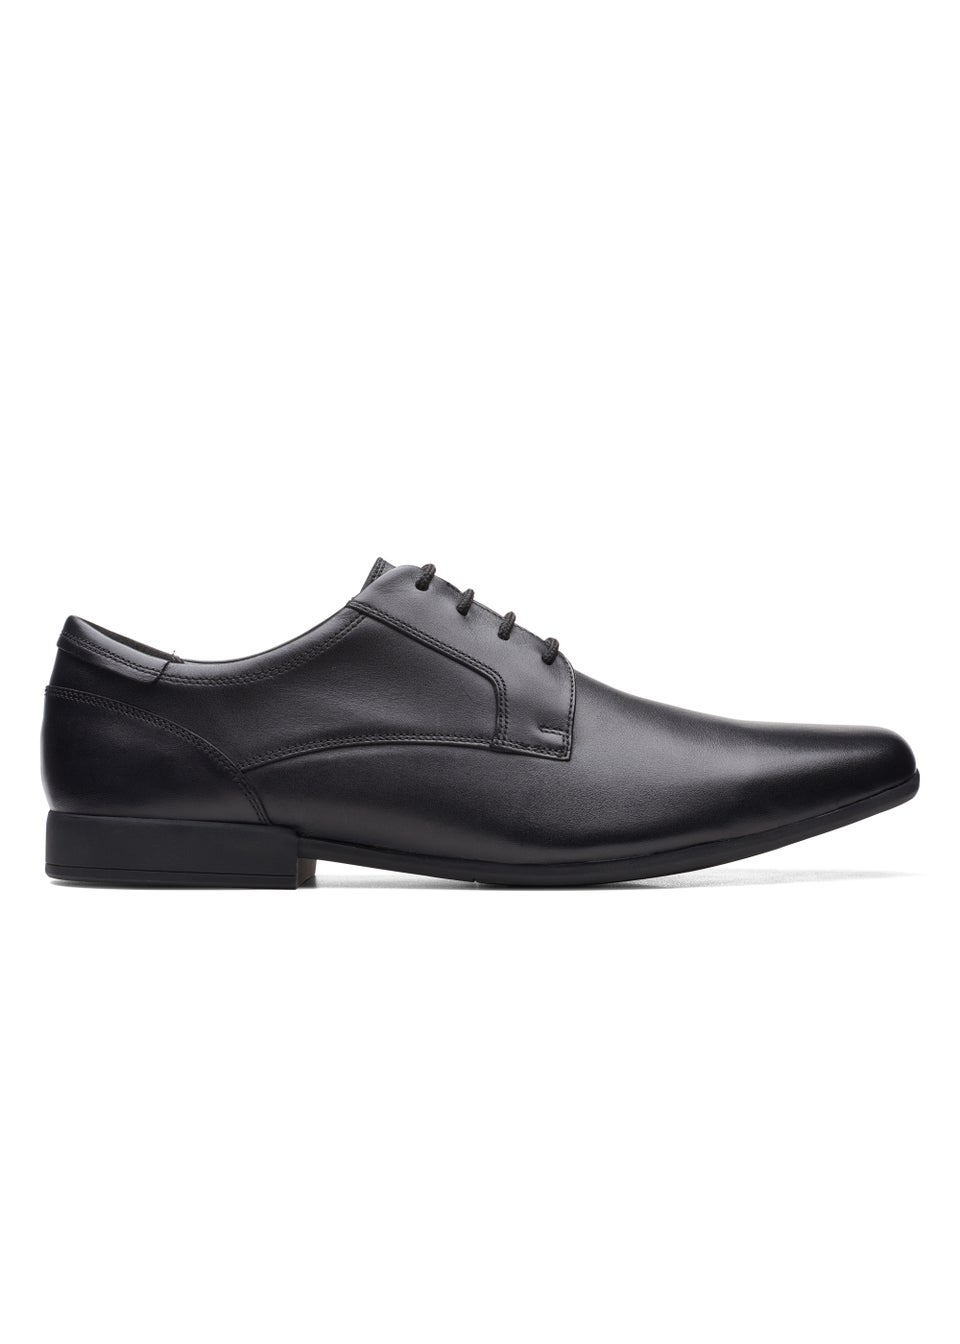 Clarks Black Sidton Lace Leather Shoes - Matalan